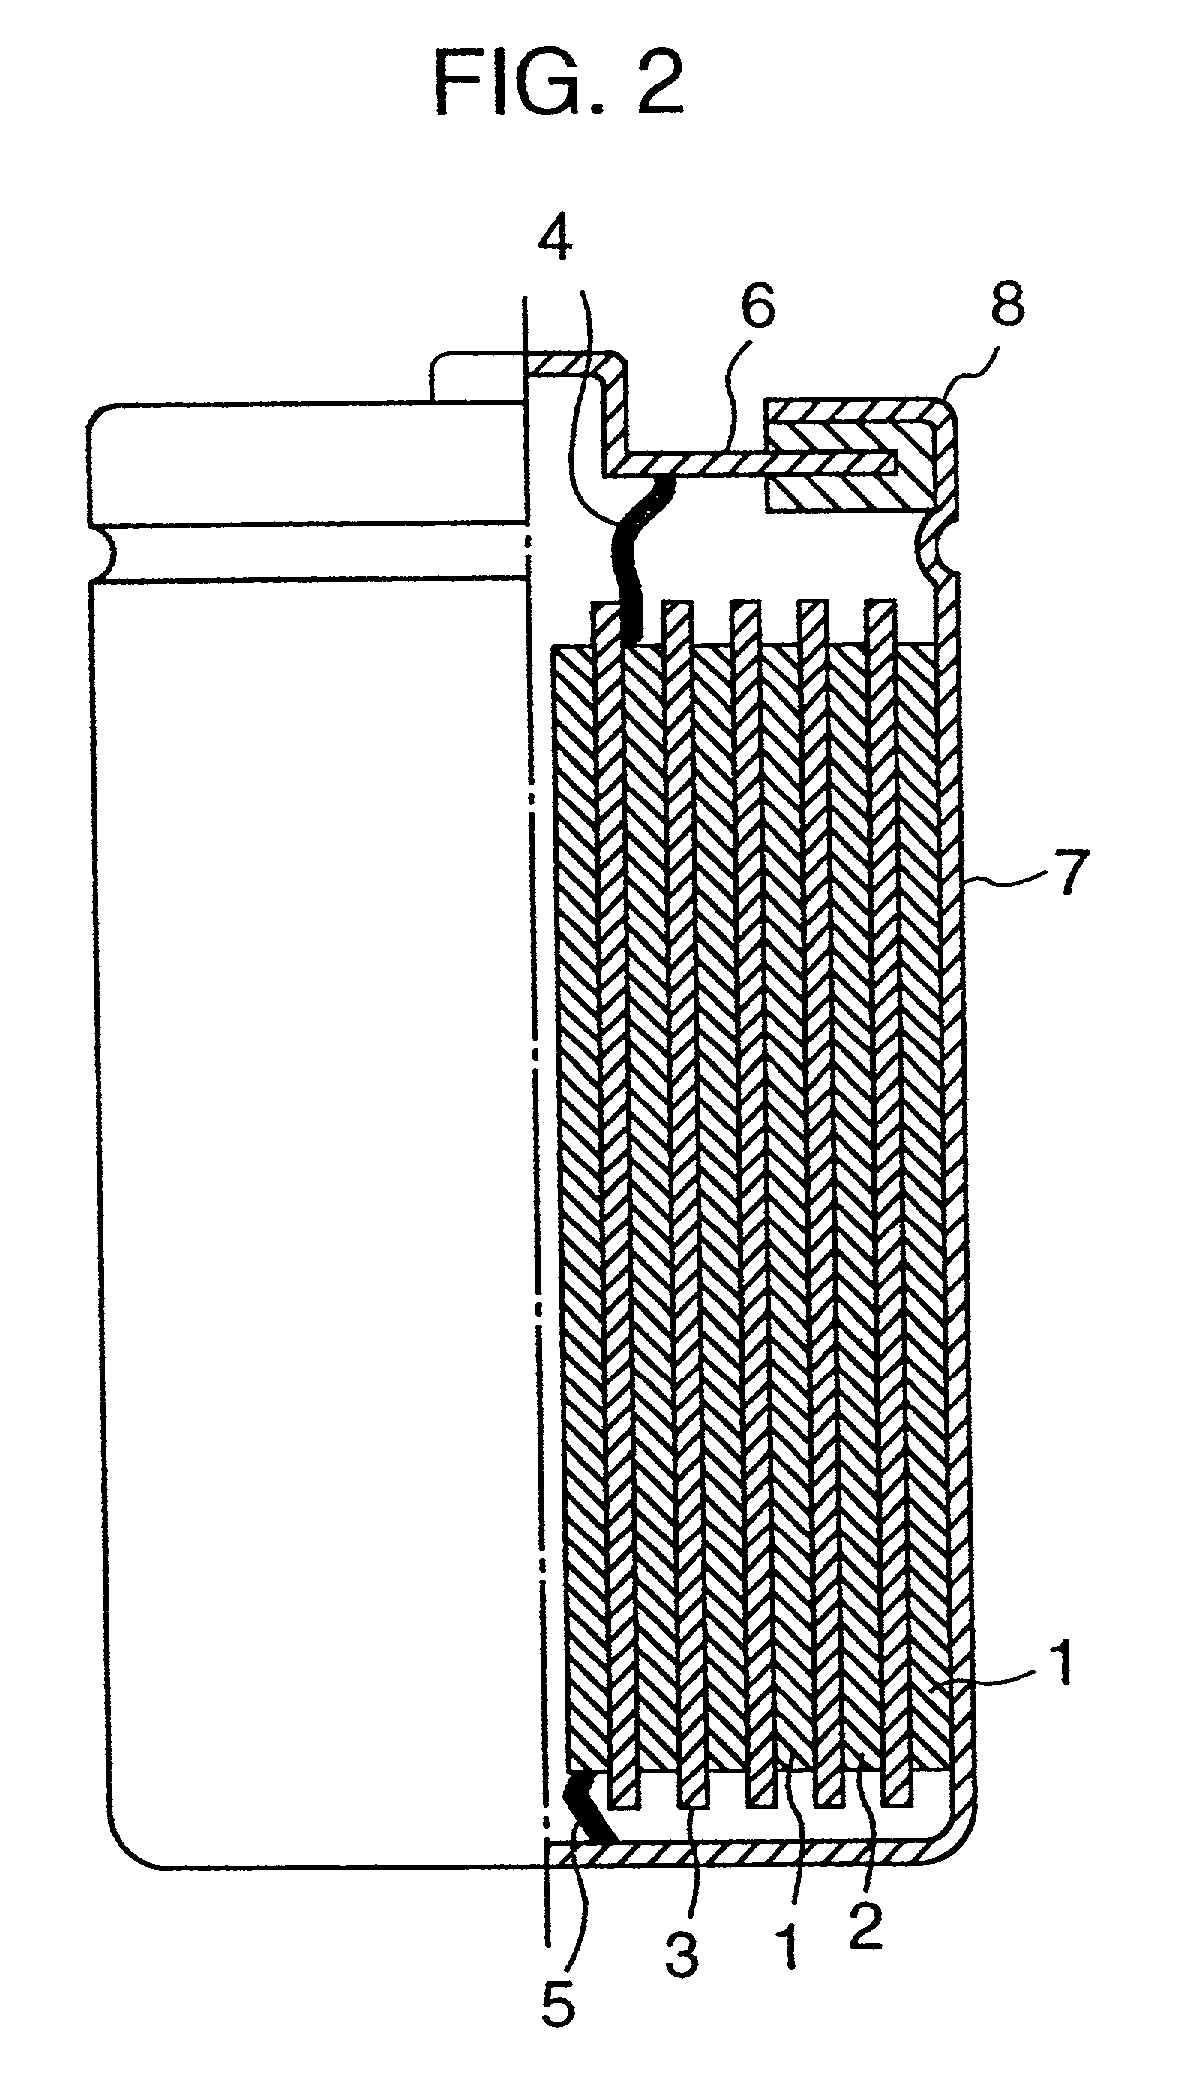 Graphite particles and lithium secondary battery using the same as negative electrode